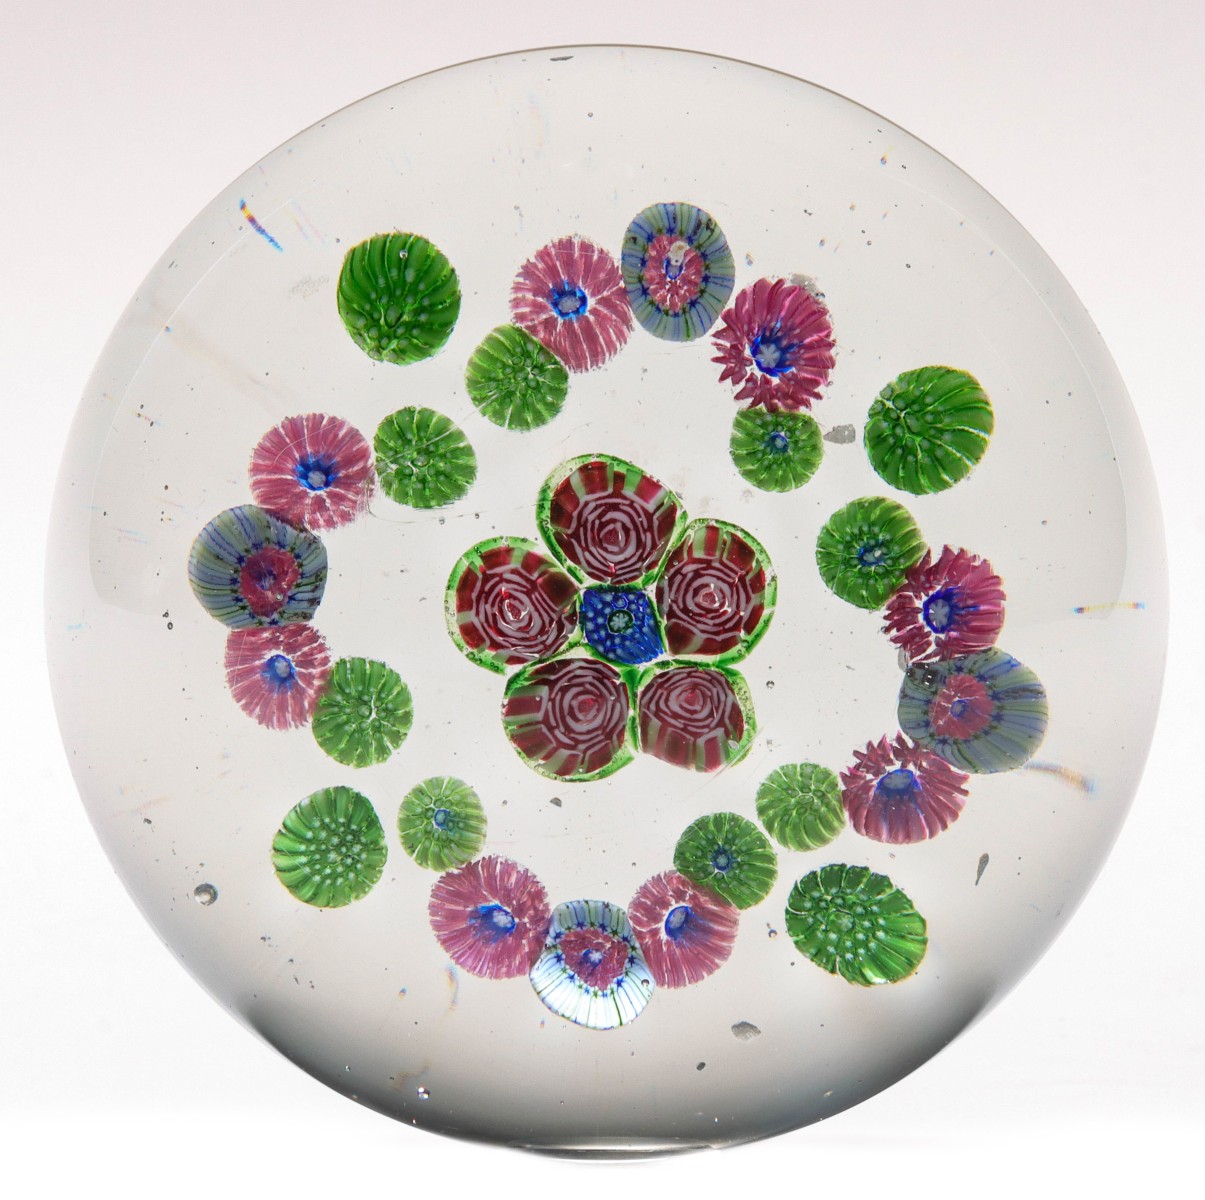 ANTIQUE MILLEFIORI PAPERWEIGHT WITH CLICHY-STYLE ROSE